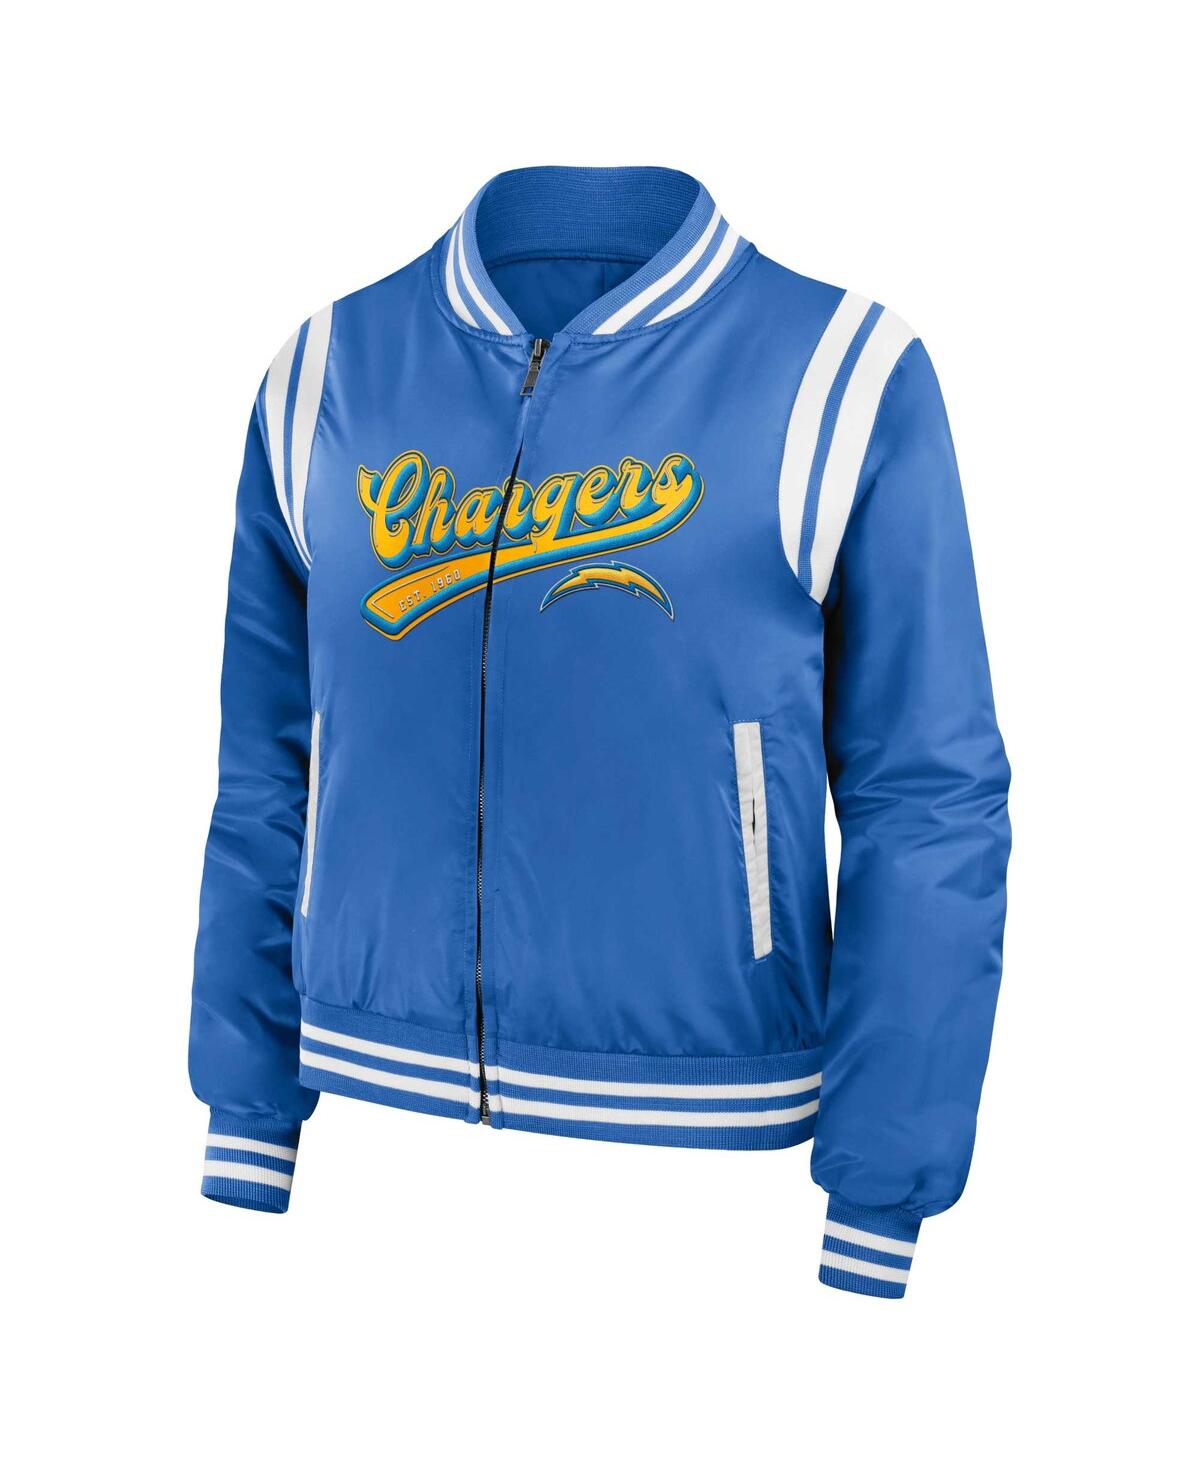 Shop Wear By Erin Andrews Women's  Powder Blue Los Angeles Chargers Bomber Full-zip Jacket